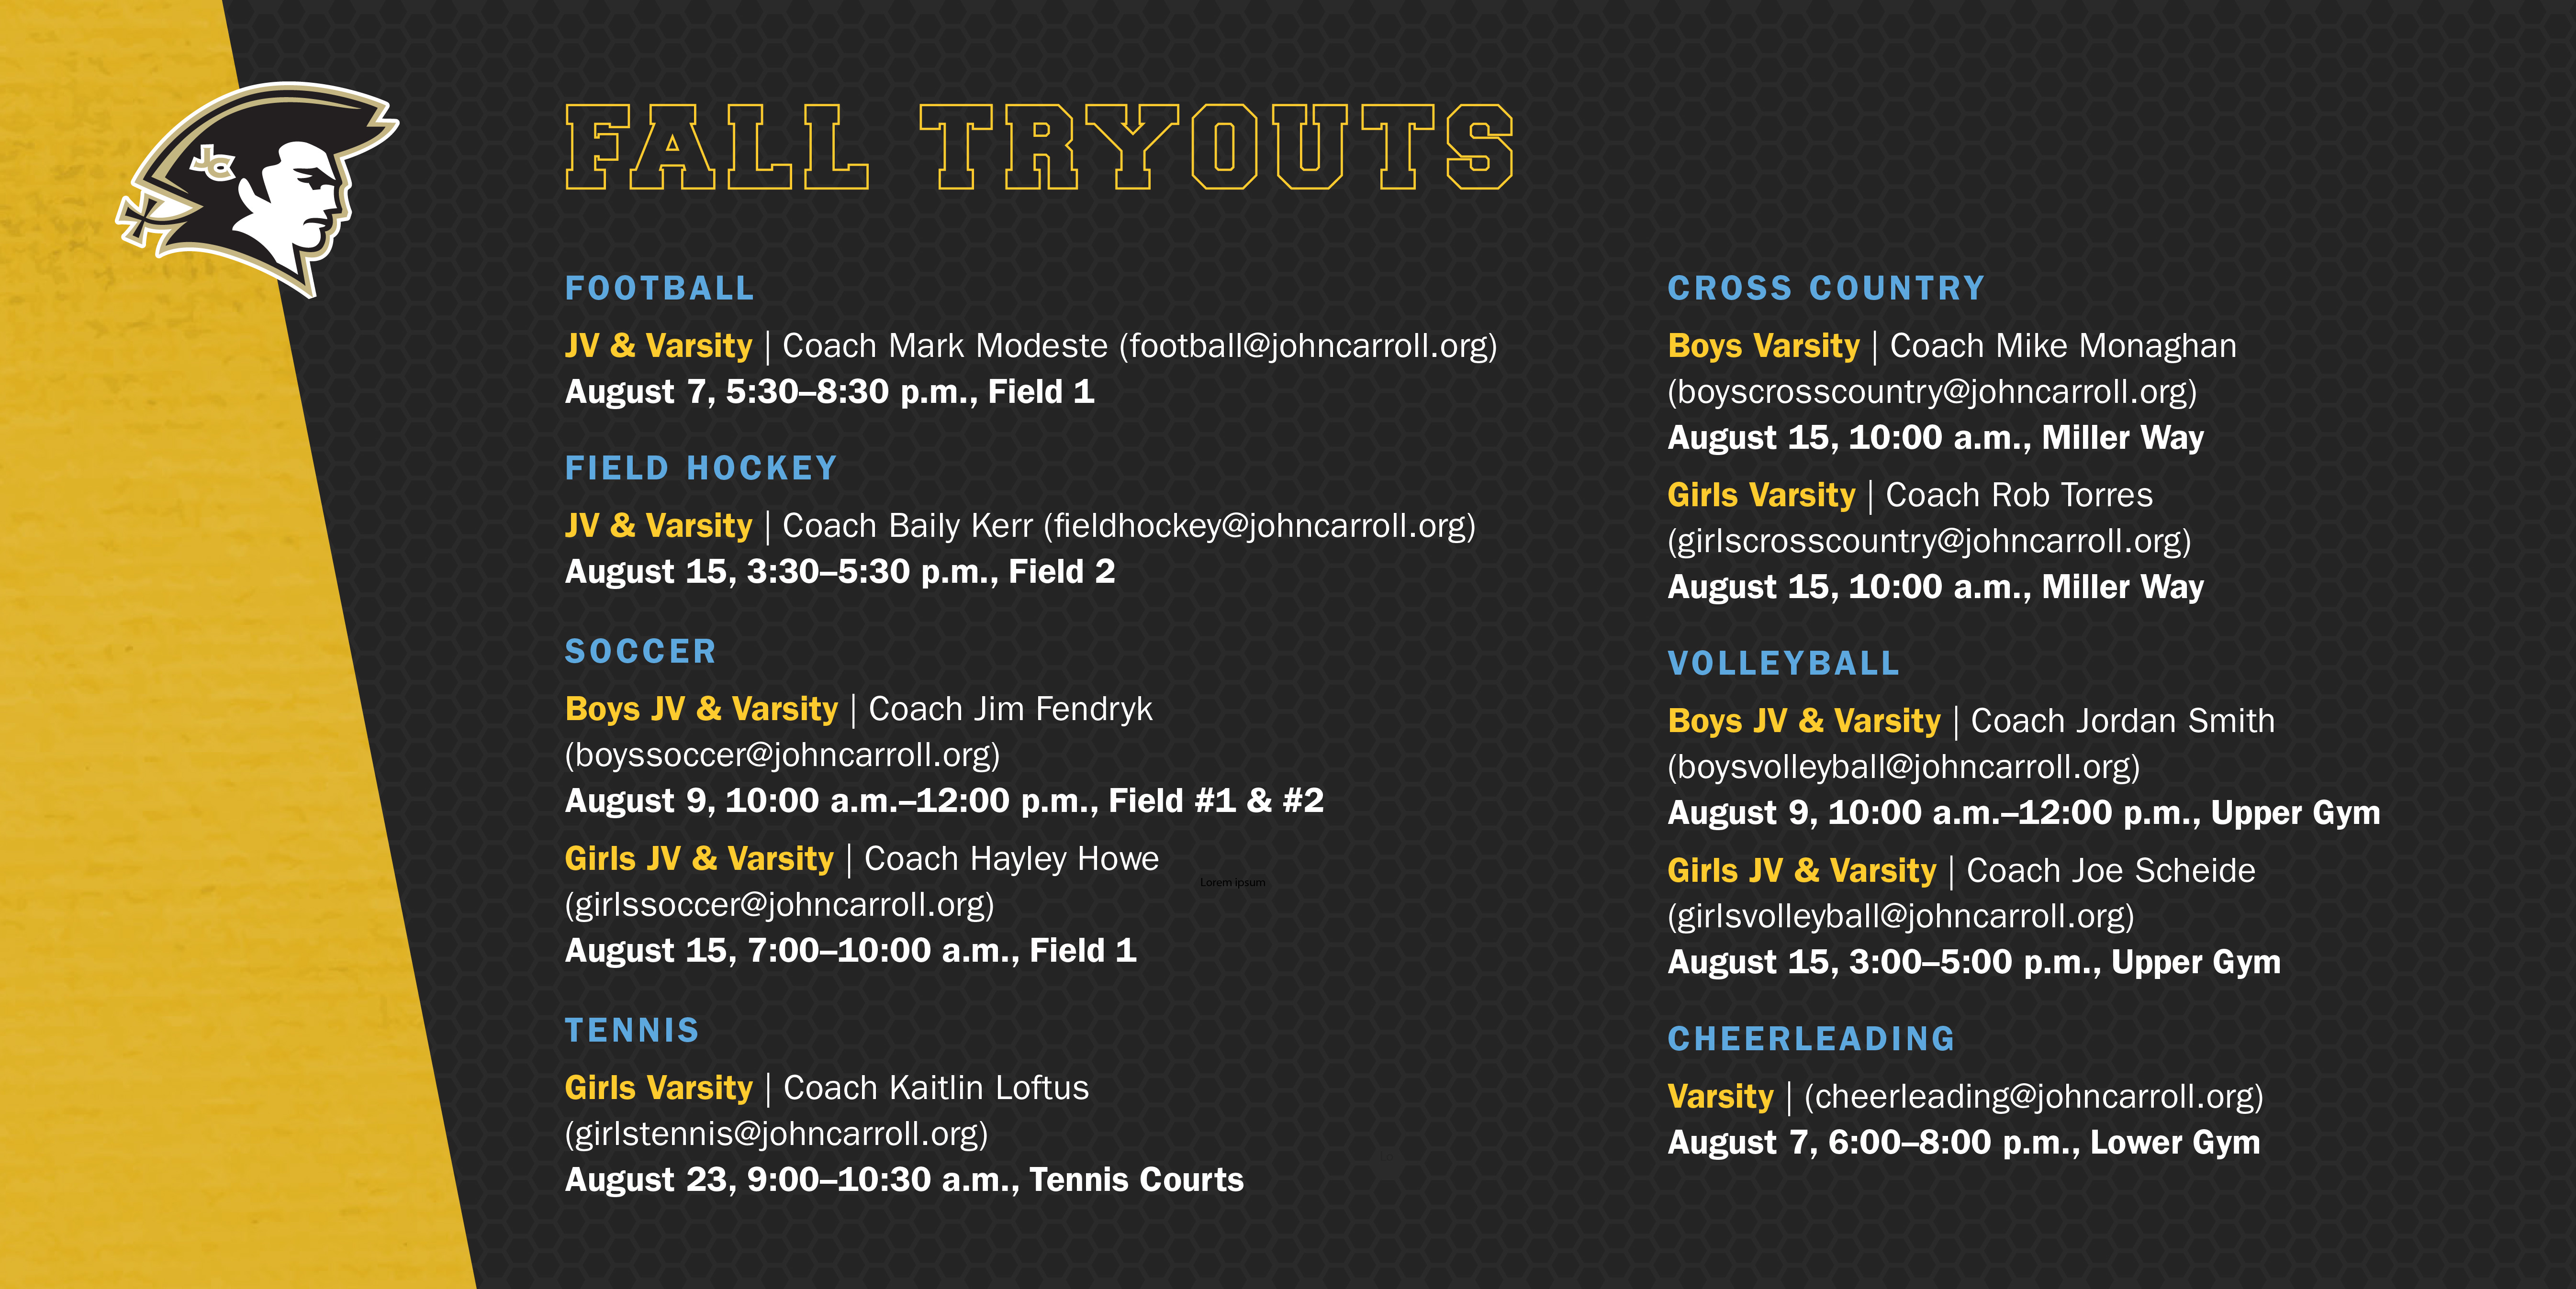 Tryout schedule